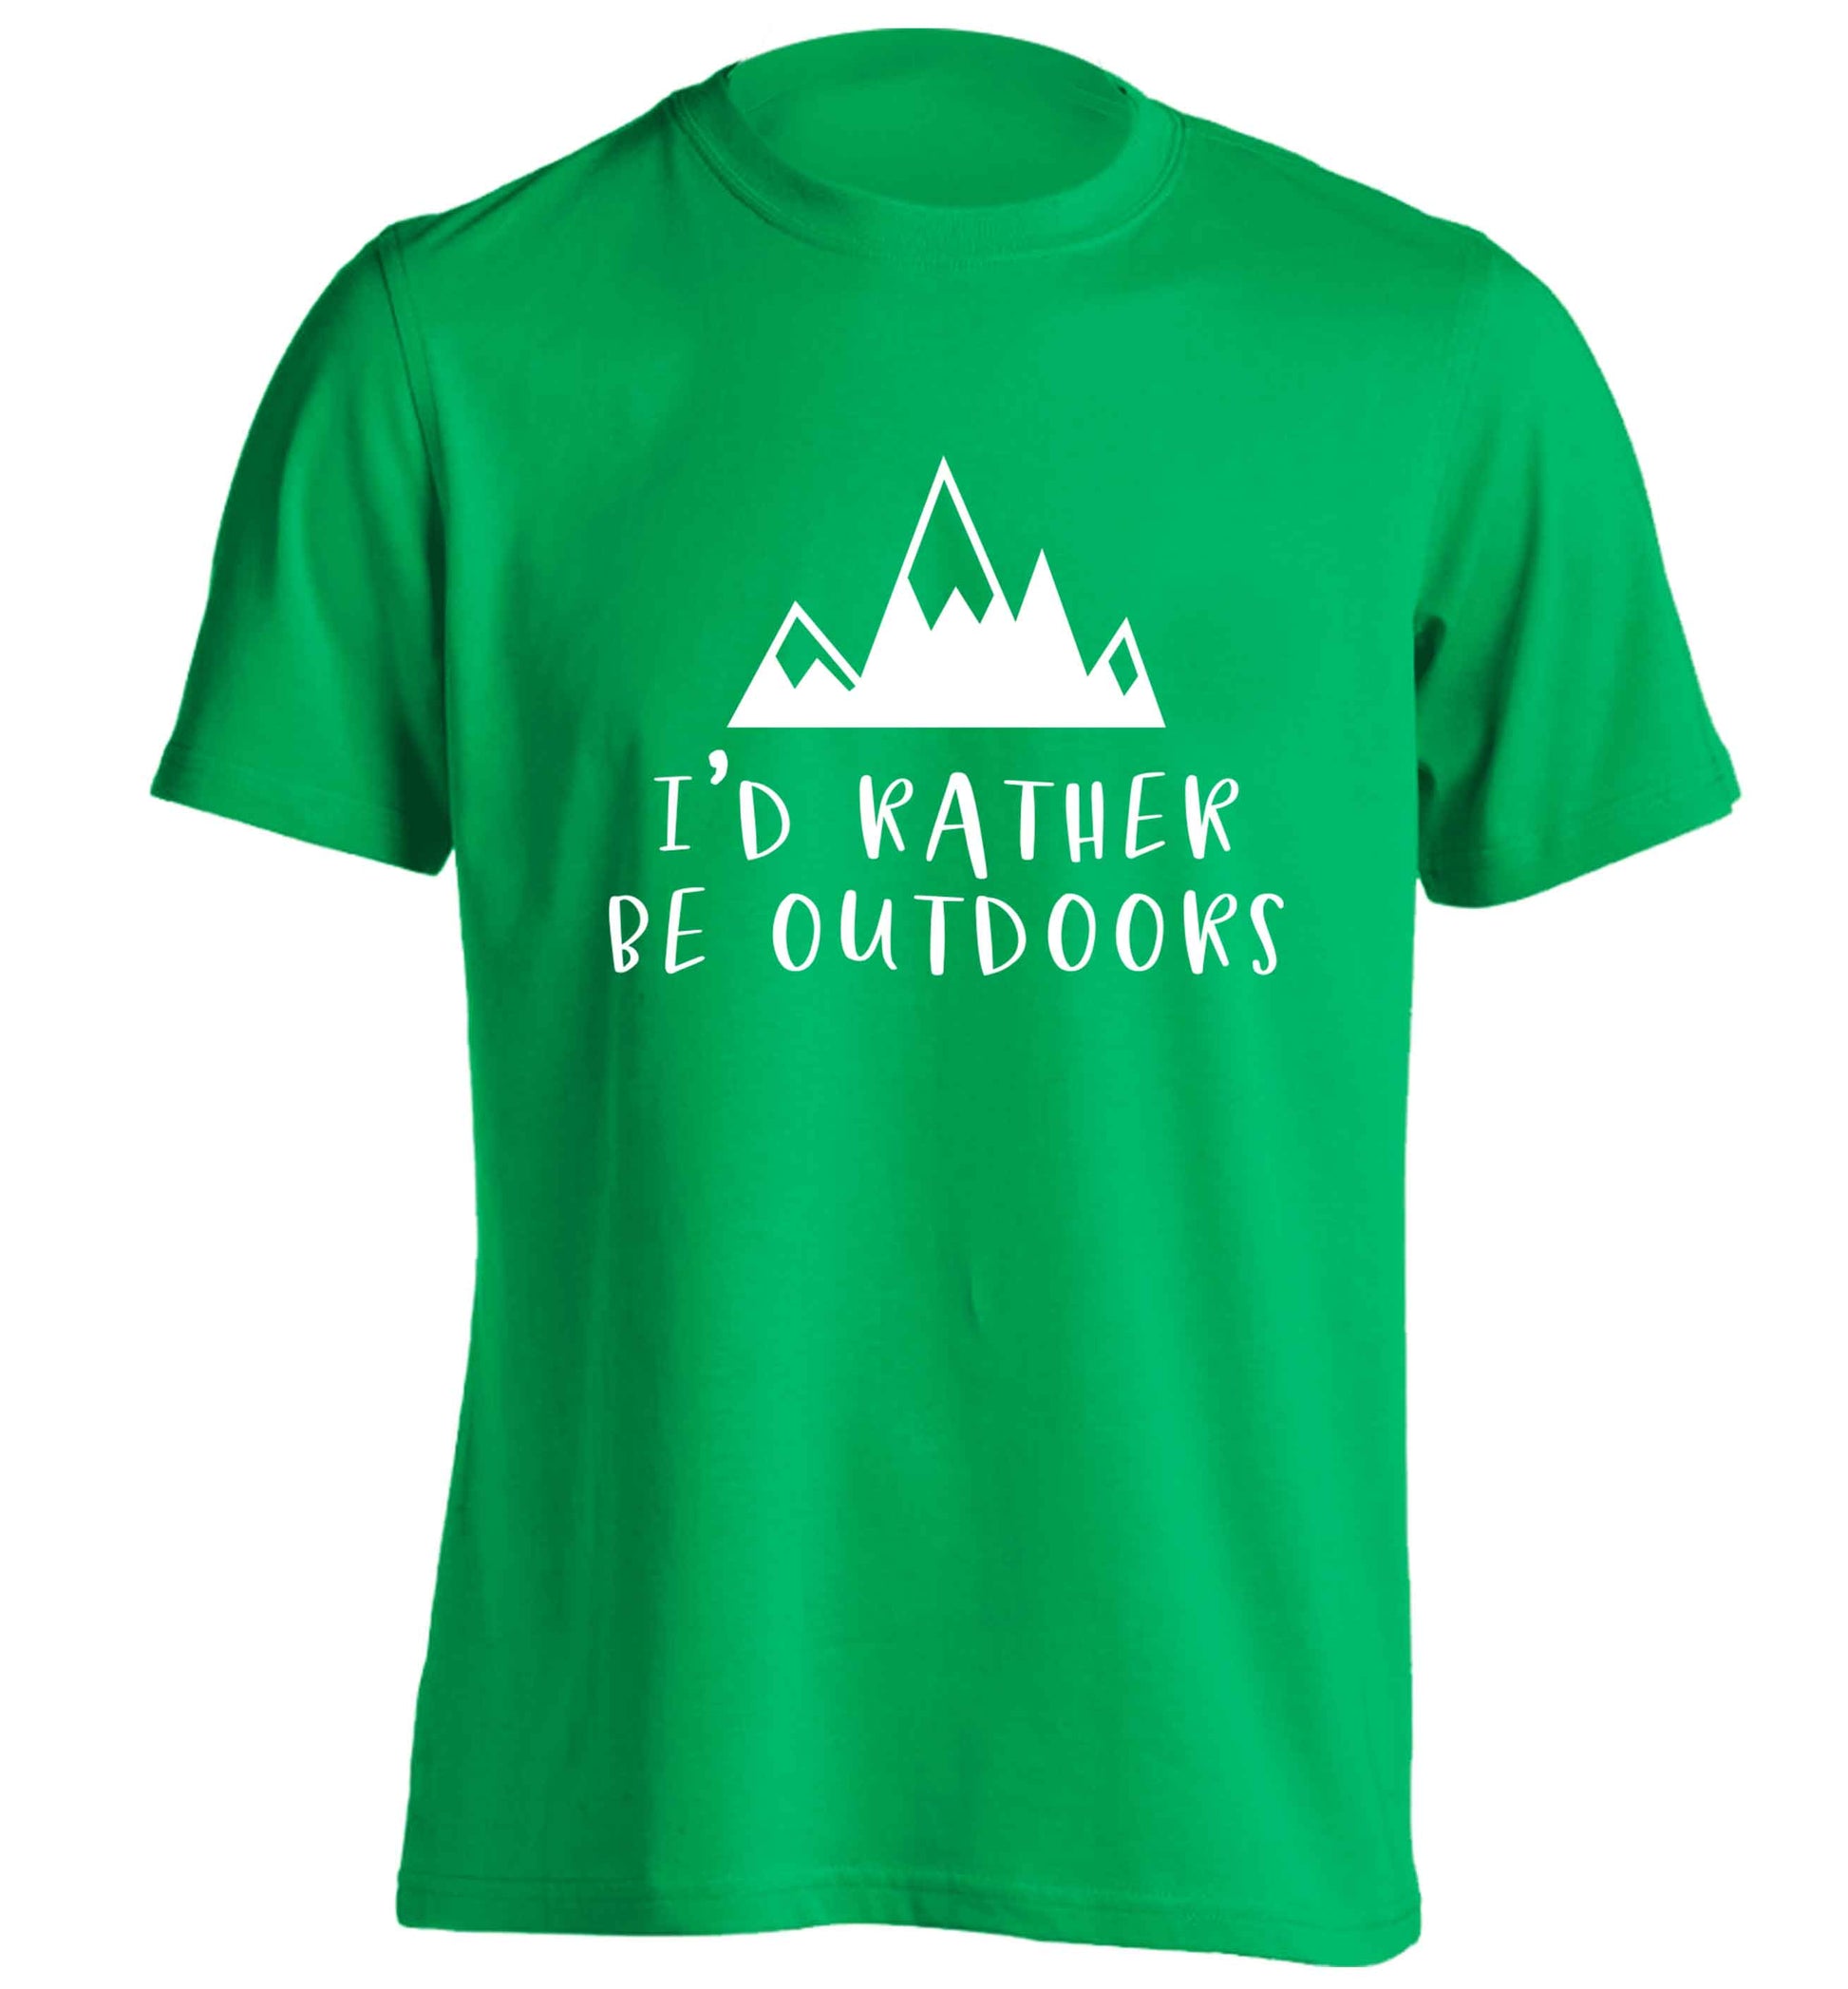 I'd rather be outdoors adults unisex green Tshirt 2XL